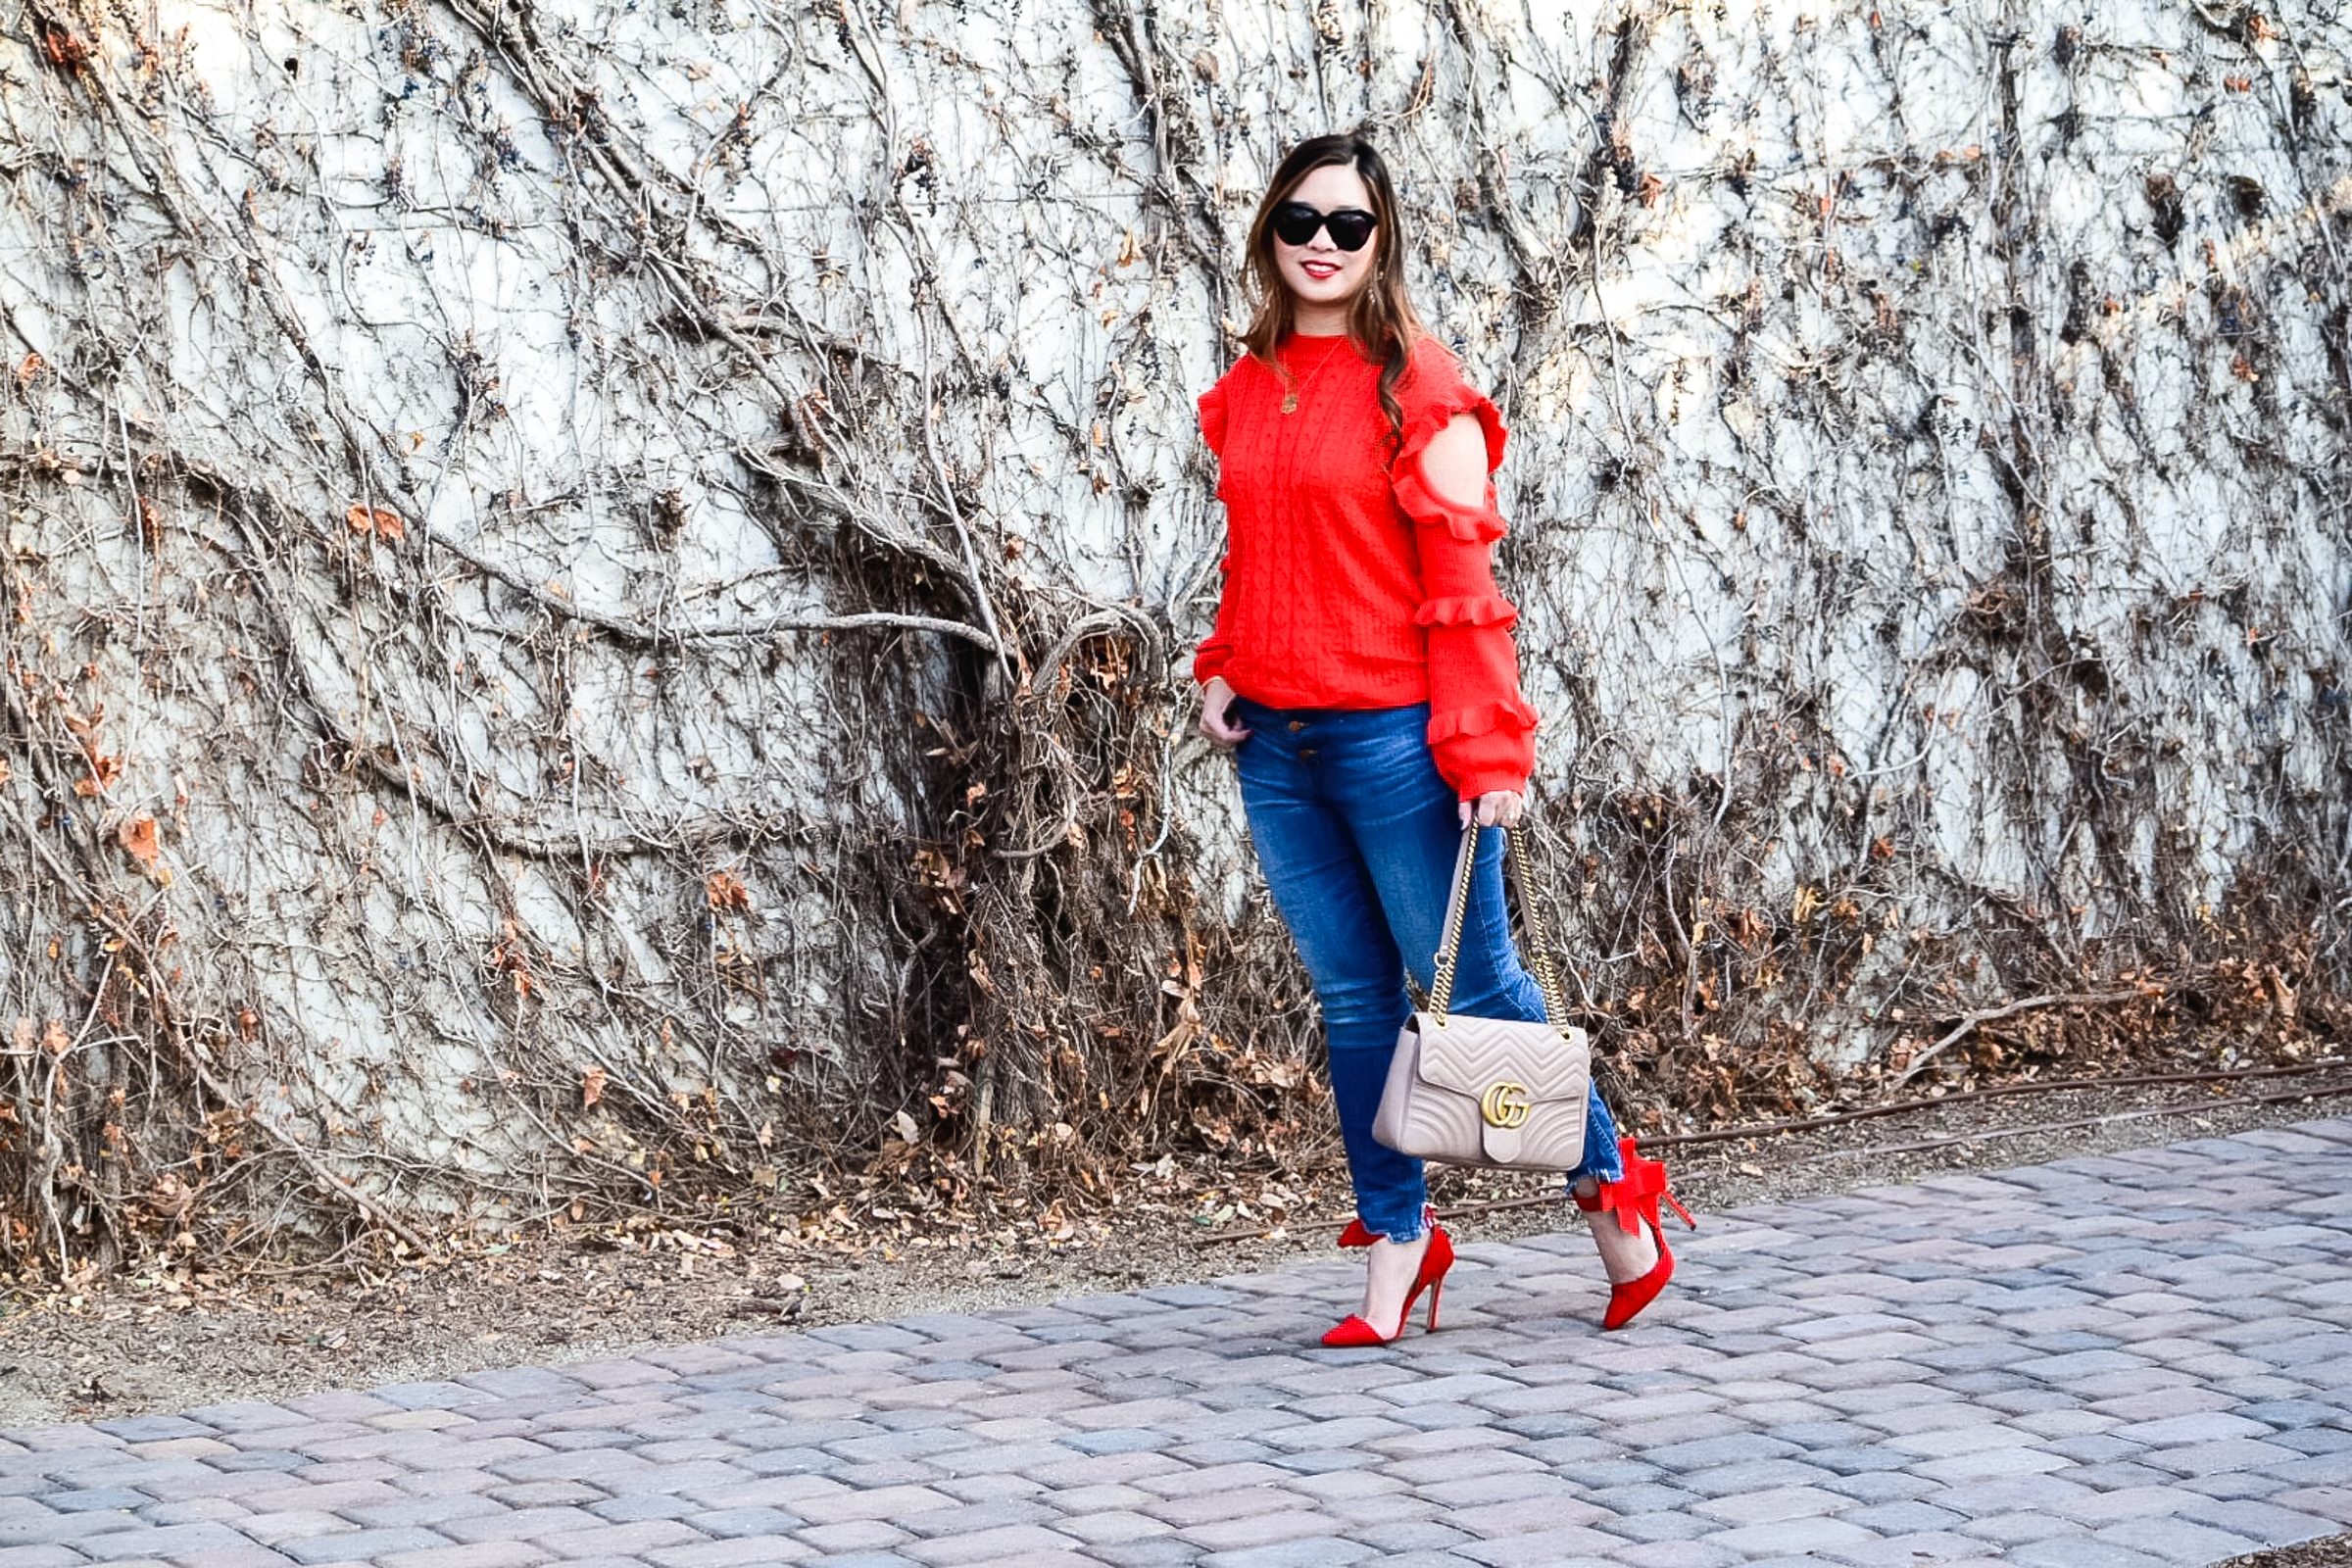 How To Score A Designer Handbag For Less On StockX by popular Utah style blogger Sandy A La Mode